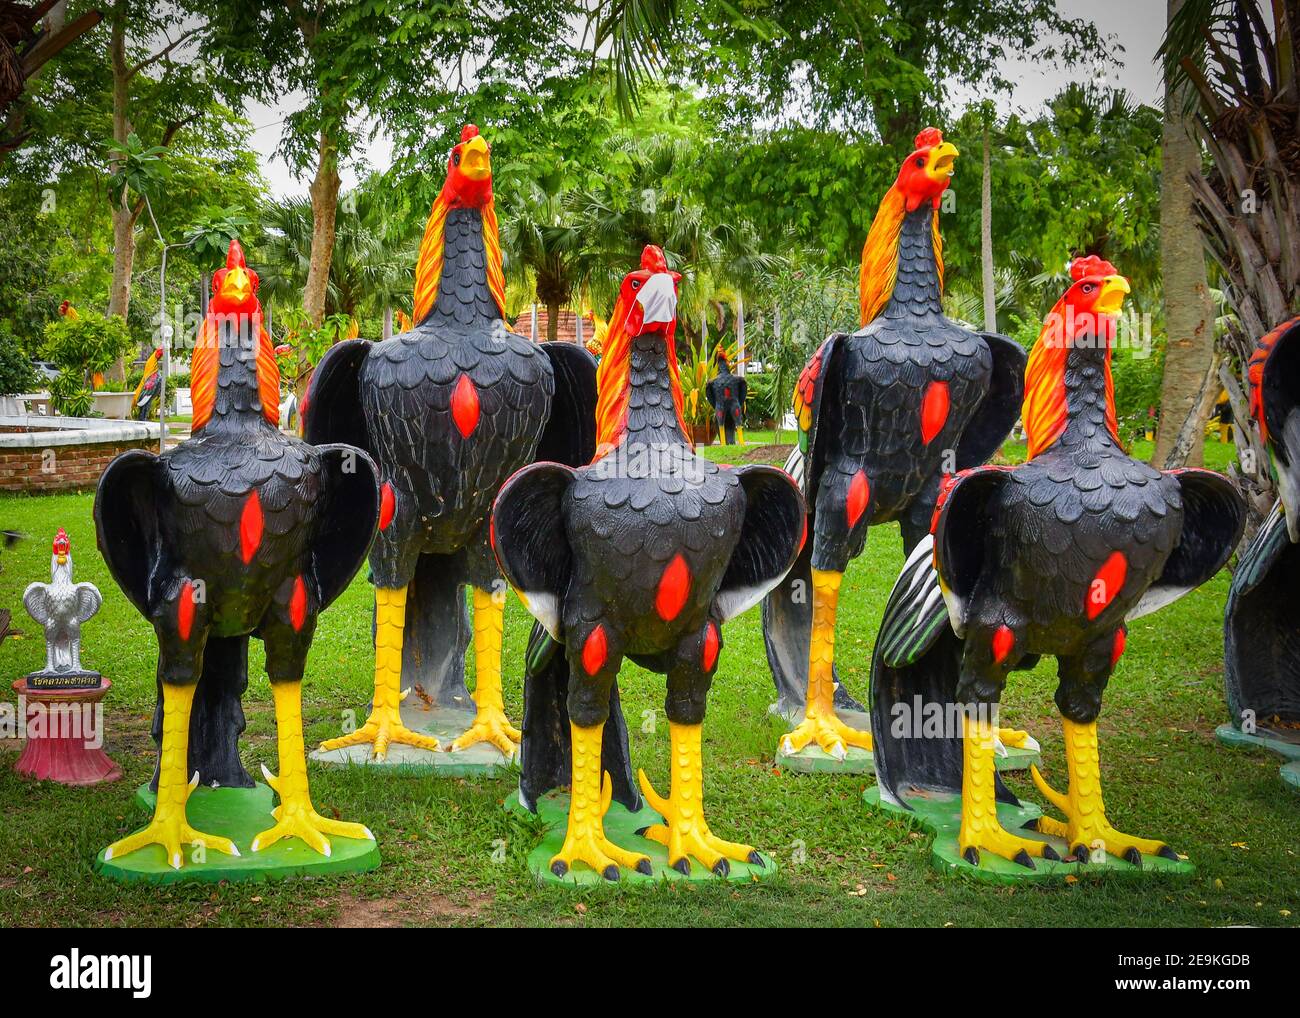 Rows of socially distanced large rooster statues in a buddhist temple complex in Thailand. One of the roosters is wearing a surgical facemask as requi Stock Photo